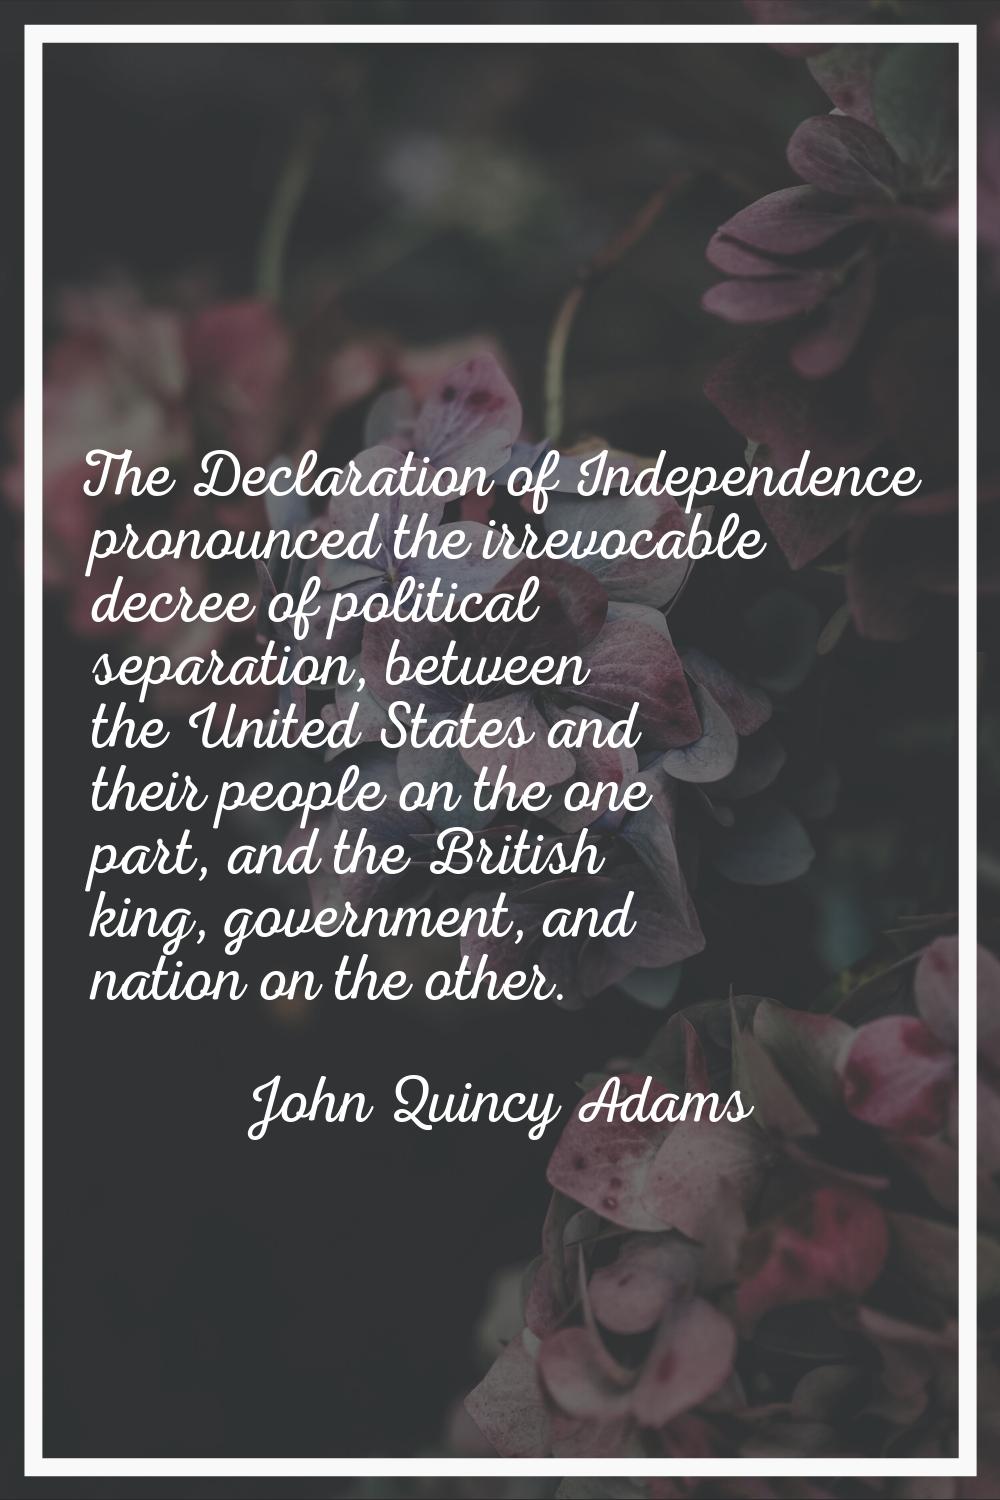 The Declaration of Independence pronounced the irrevocable decree of political separation, between 